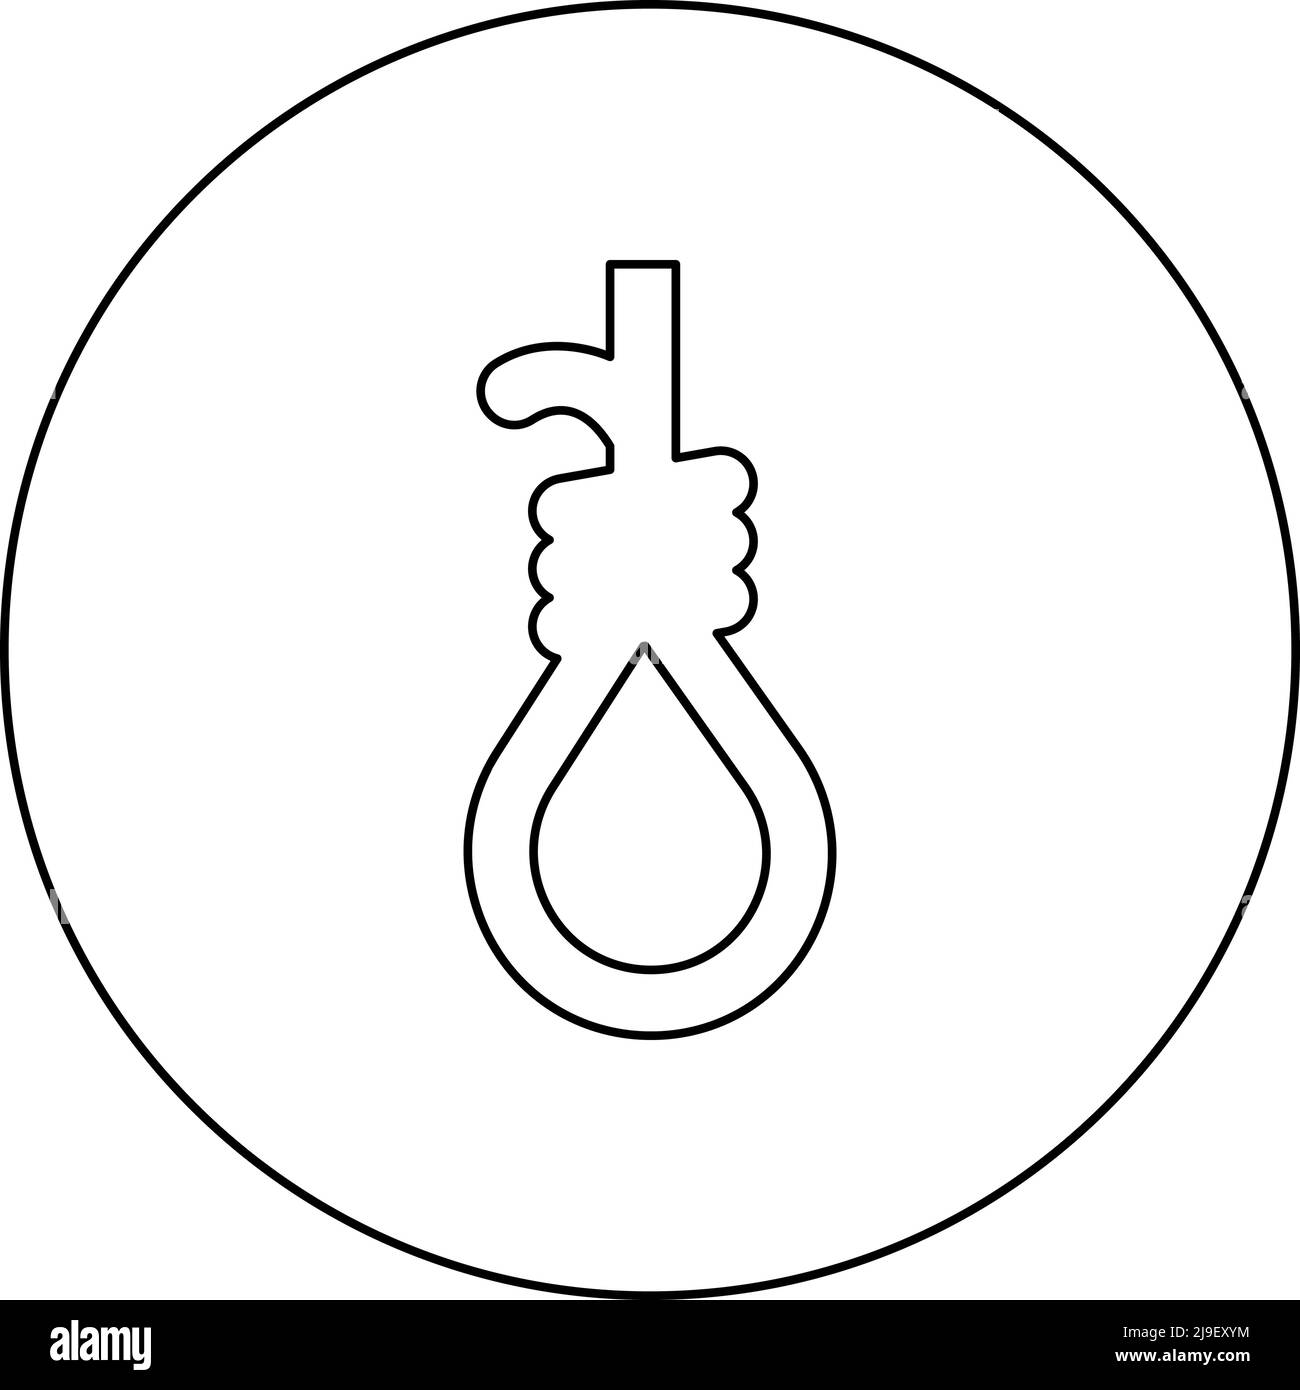 Loop for gallows hangman's noose Rope suicide lynching icon in circle round black color vector illustration image outline contour line thin style Stock Vector